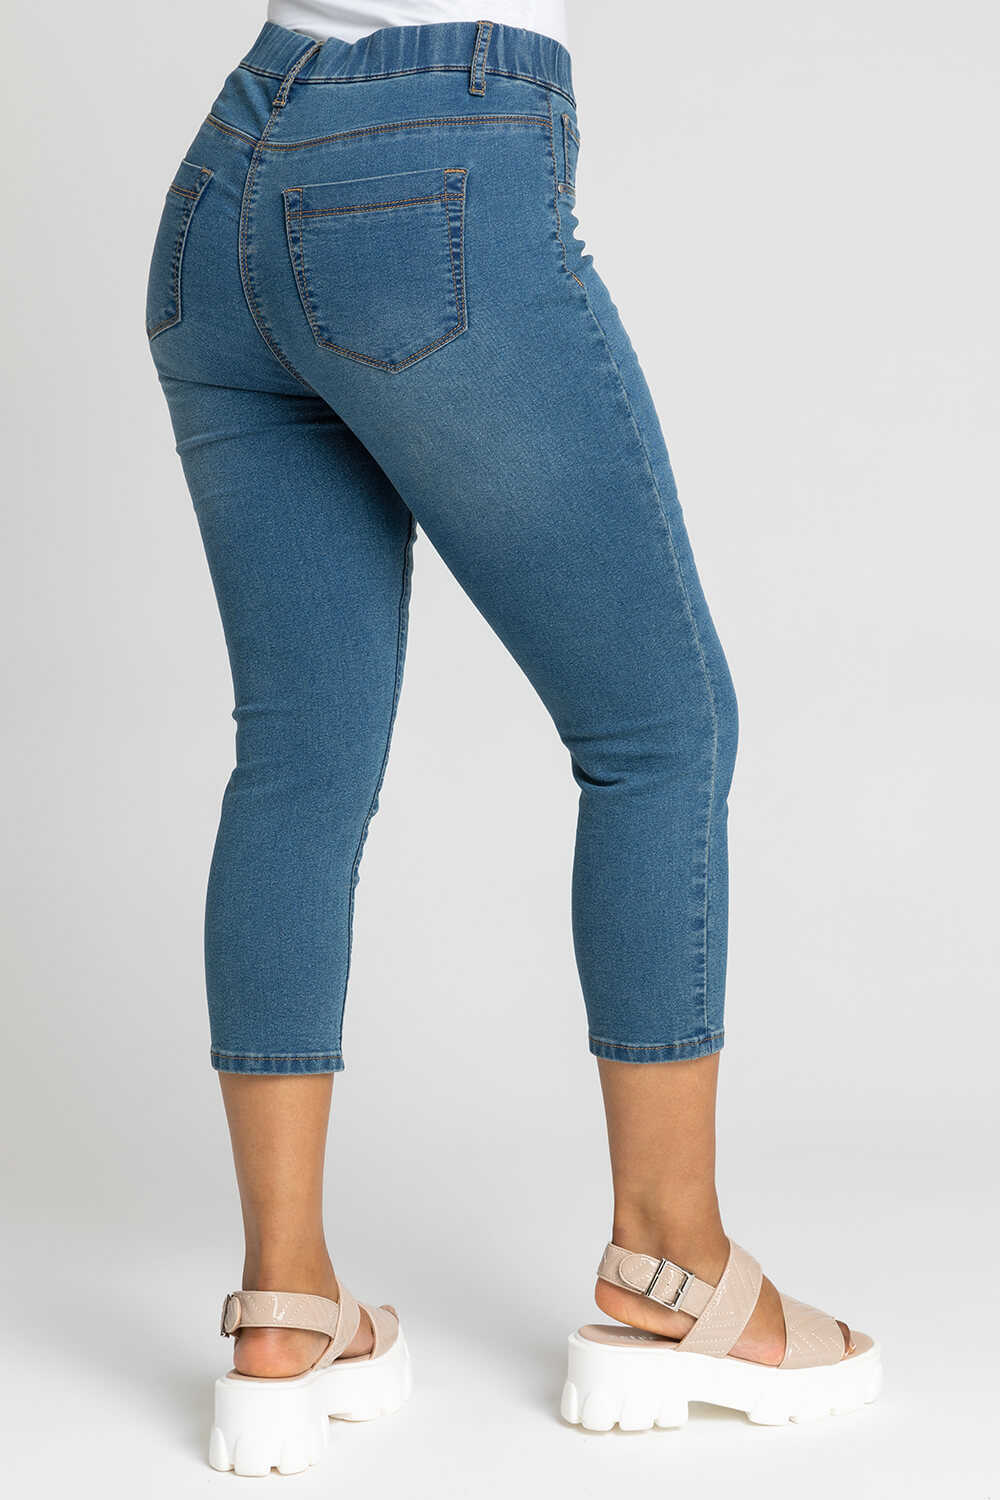 Petite Jeans for Women Skinny Jeans High Rise Jeans Baggy Jeans